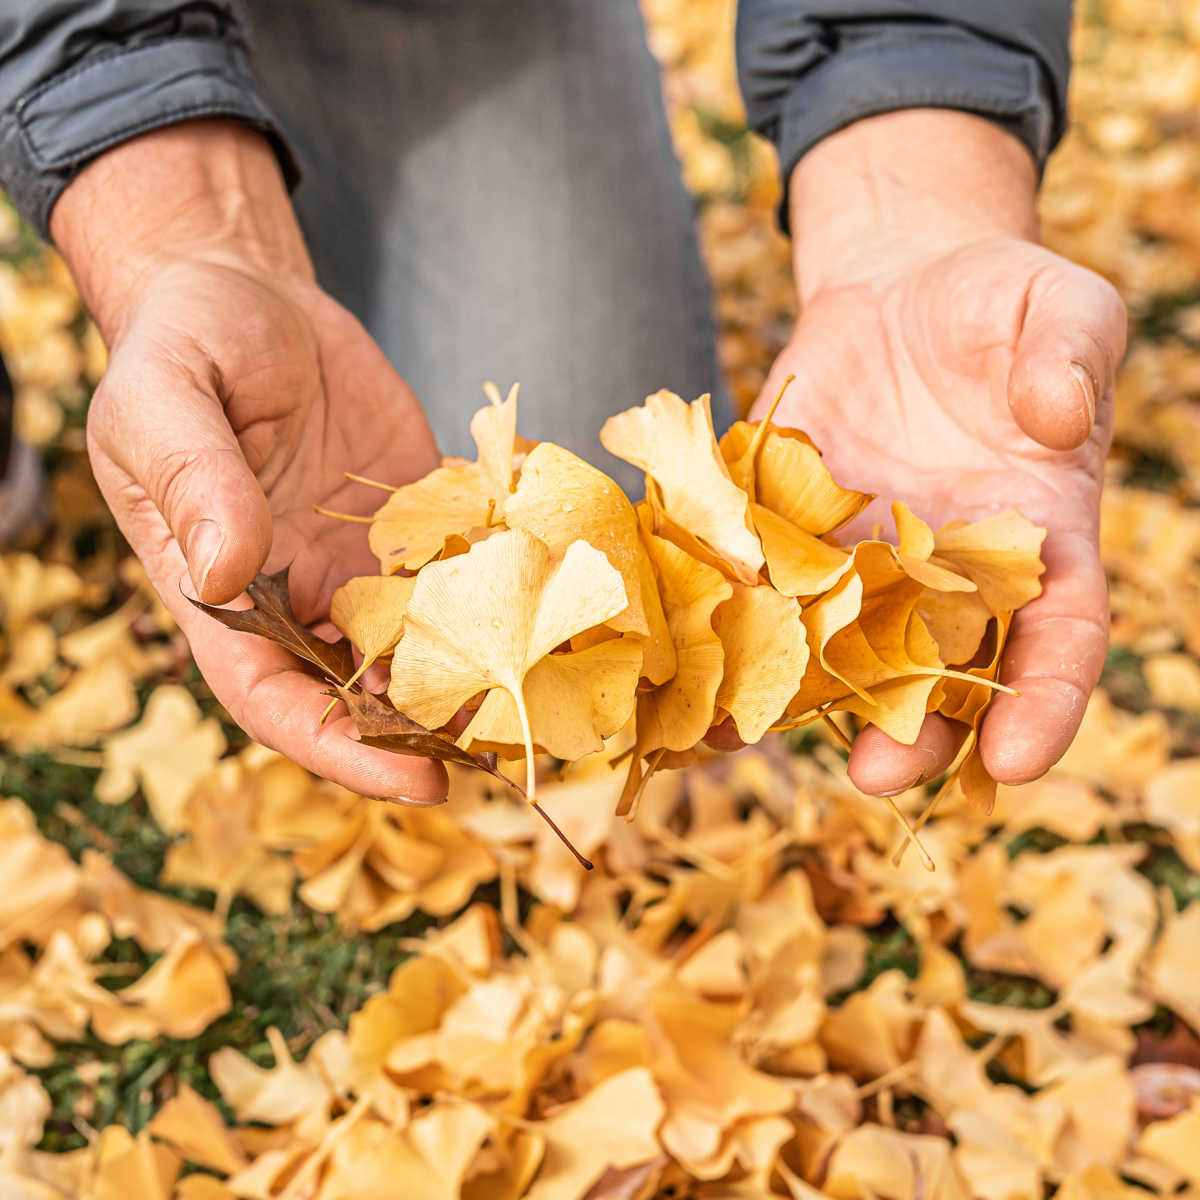 Hands holding fall leaves.